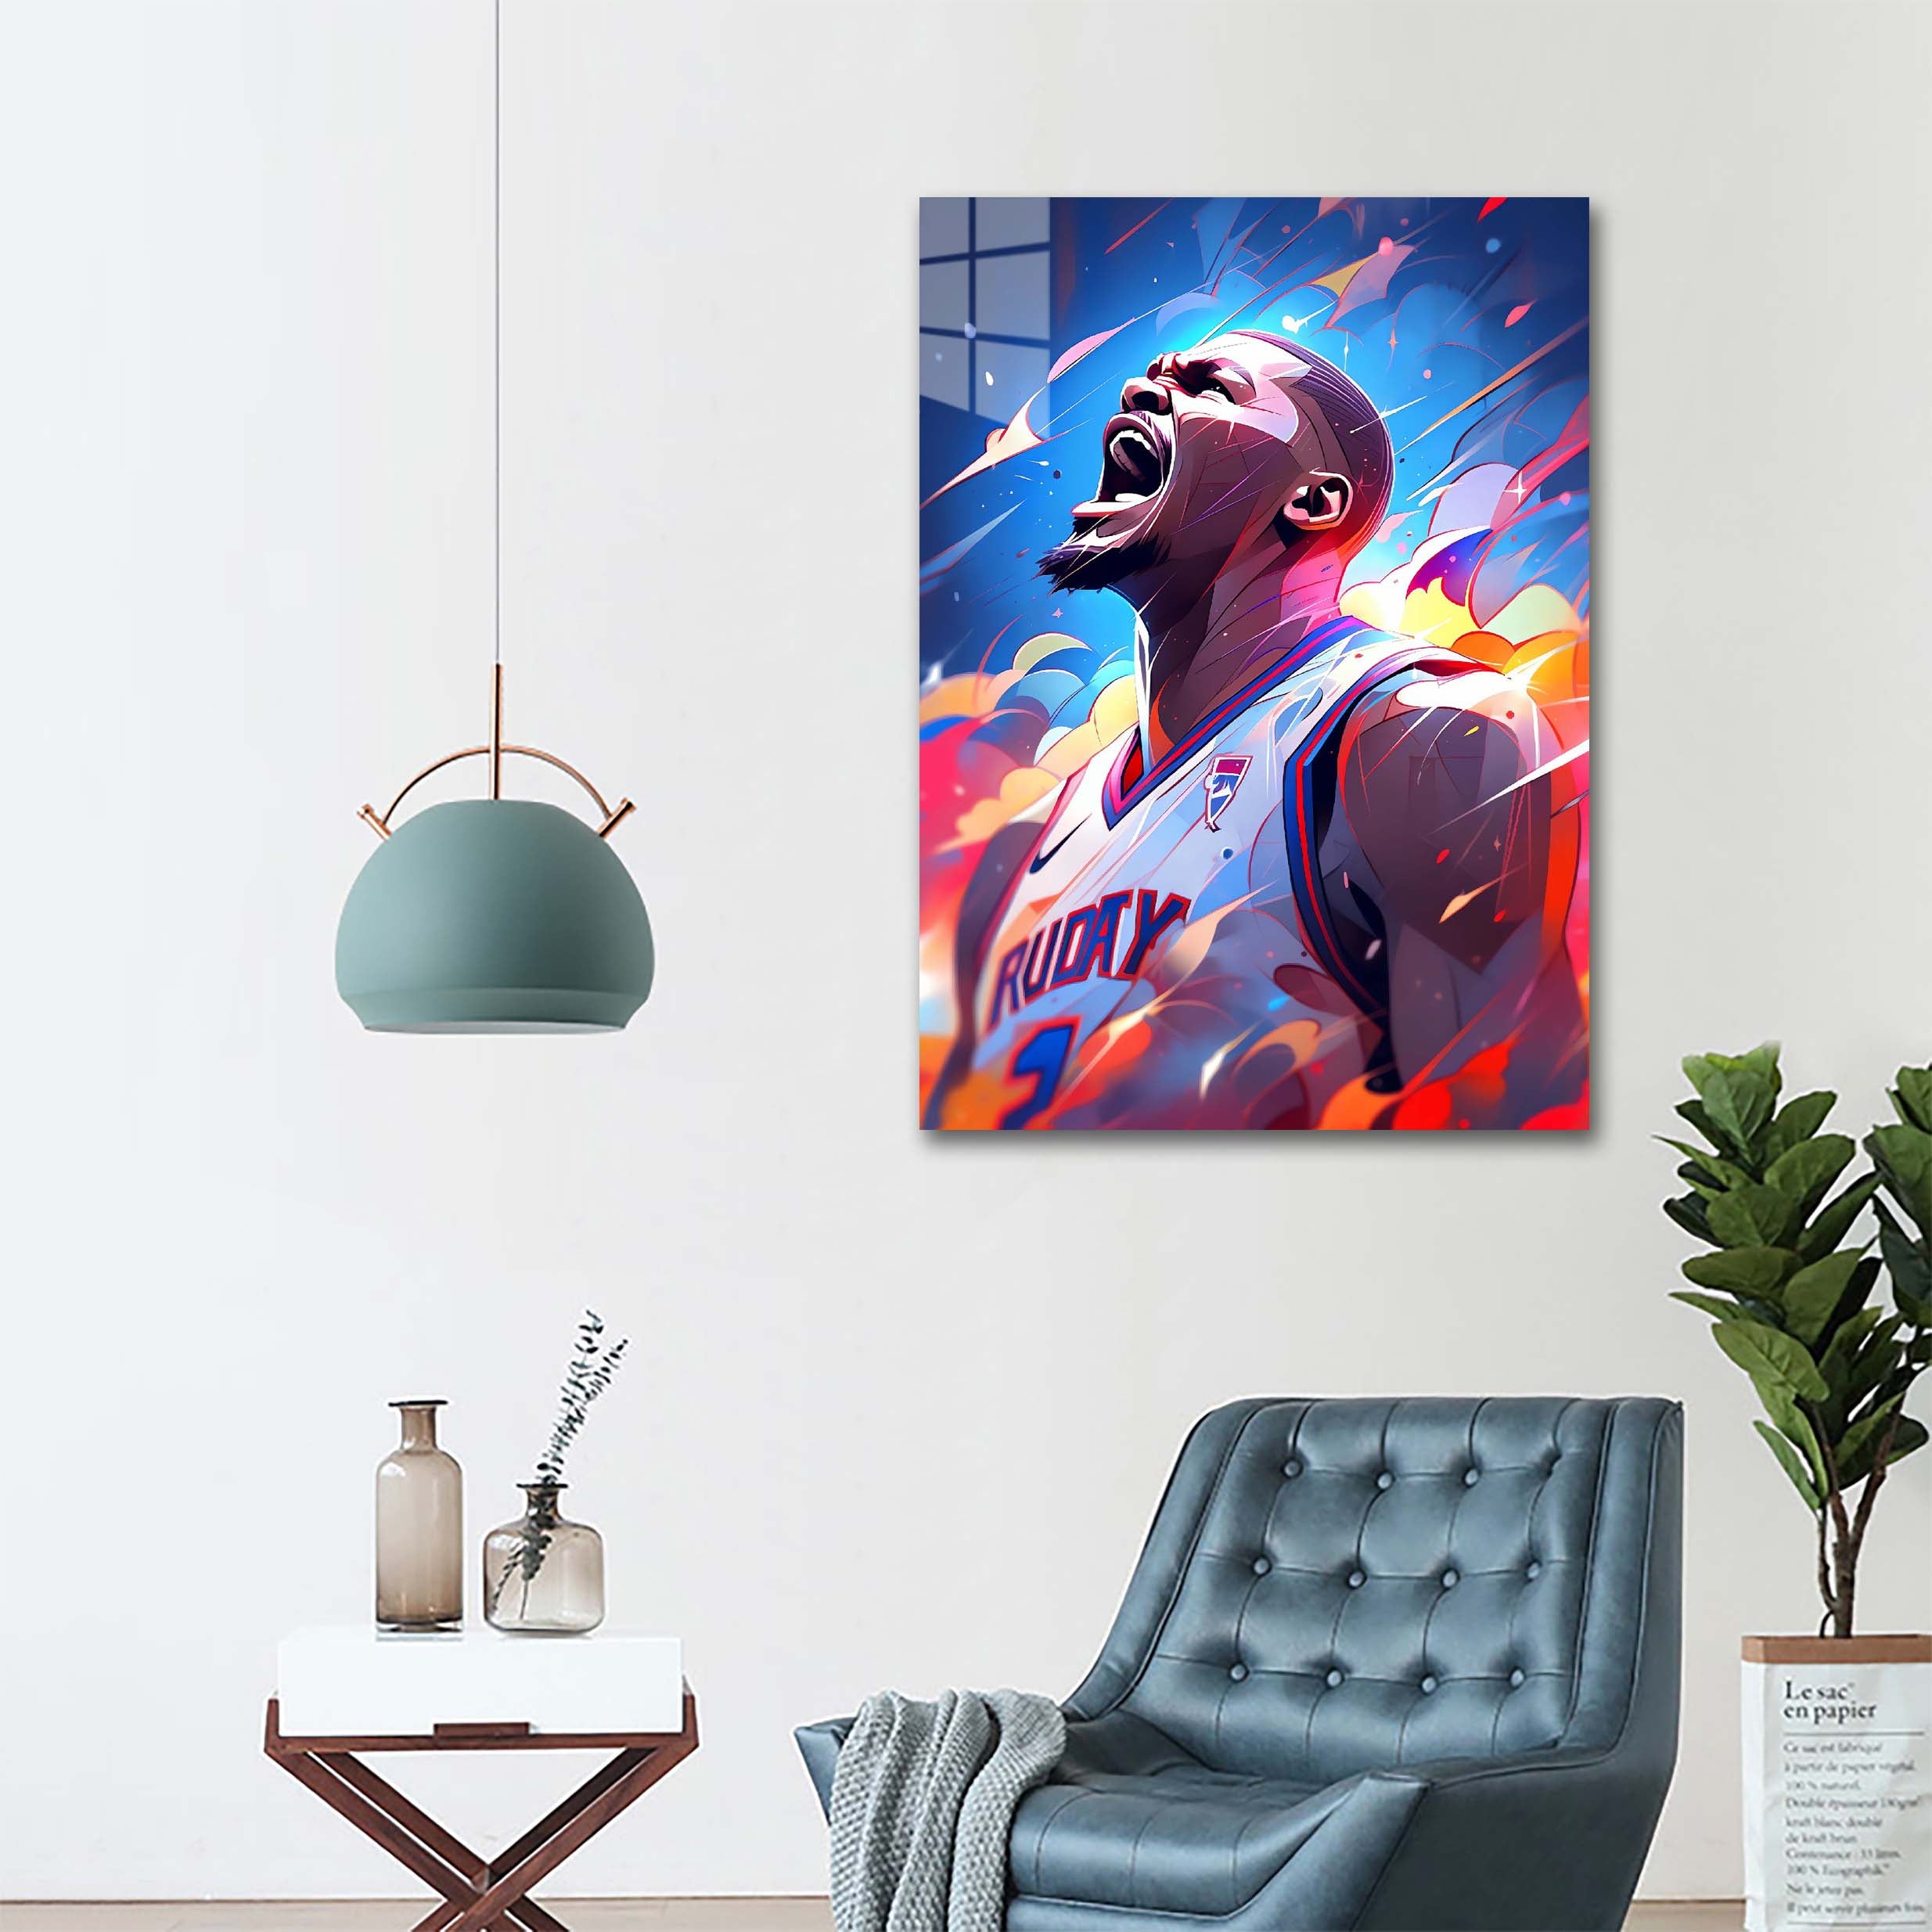 KevinDurant-designed by @WowPaper